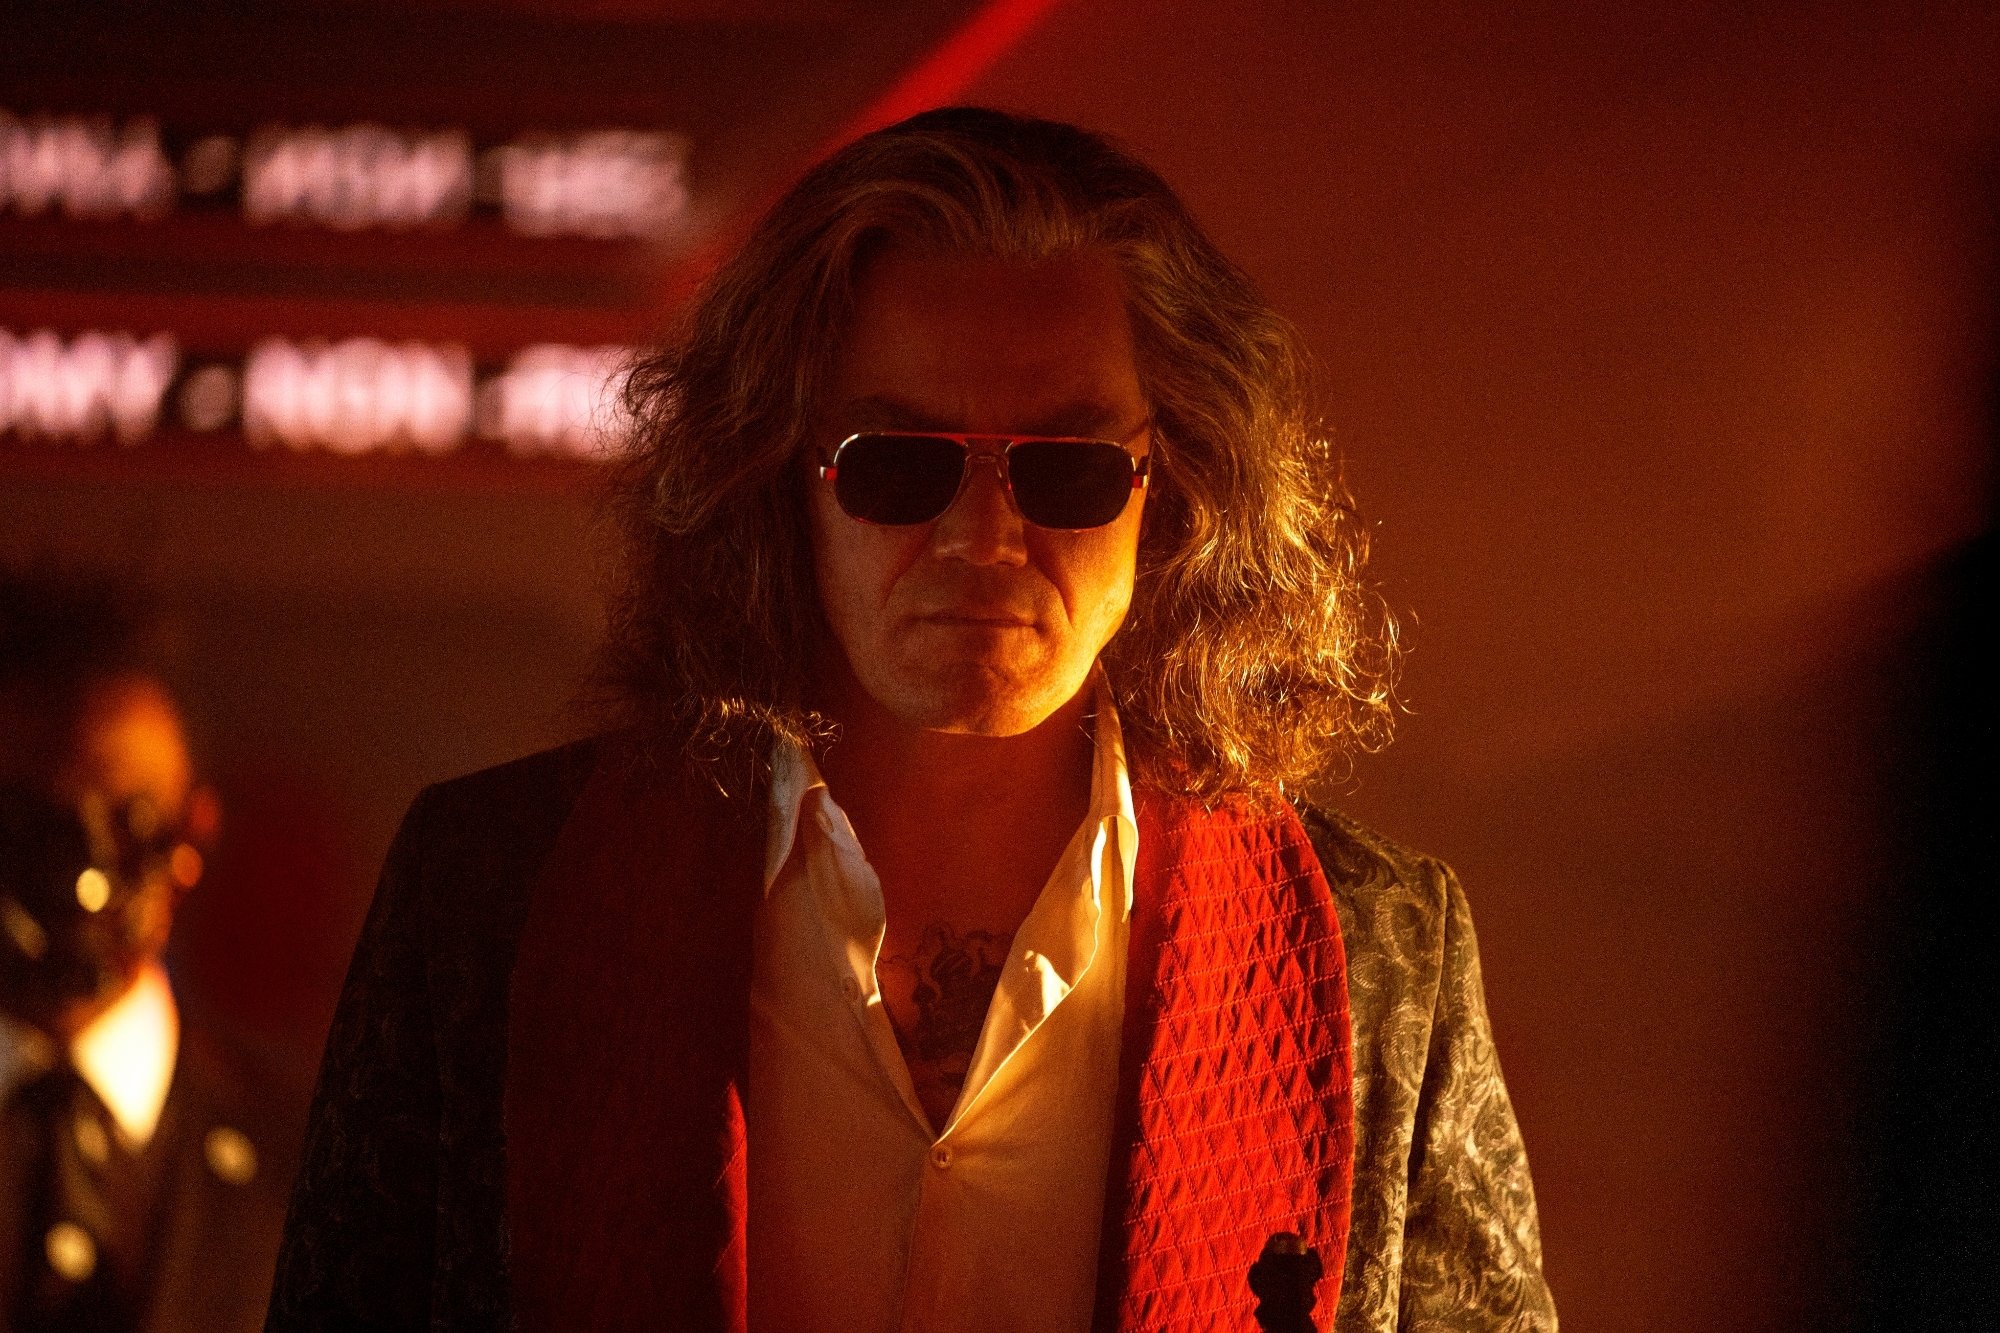 'Bullet Train' Michael Shannon as White Death, which involves Channing Tatum cameo. Shannon is wearing a robe with a white collared shirt underneath it and sunglasses.